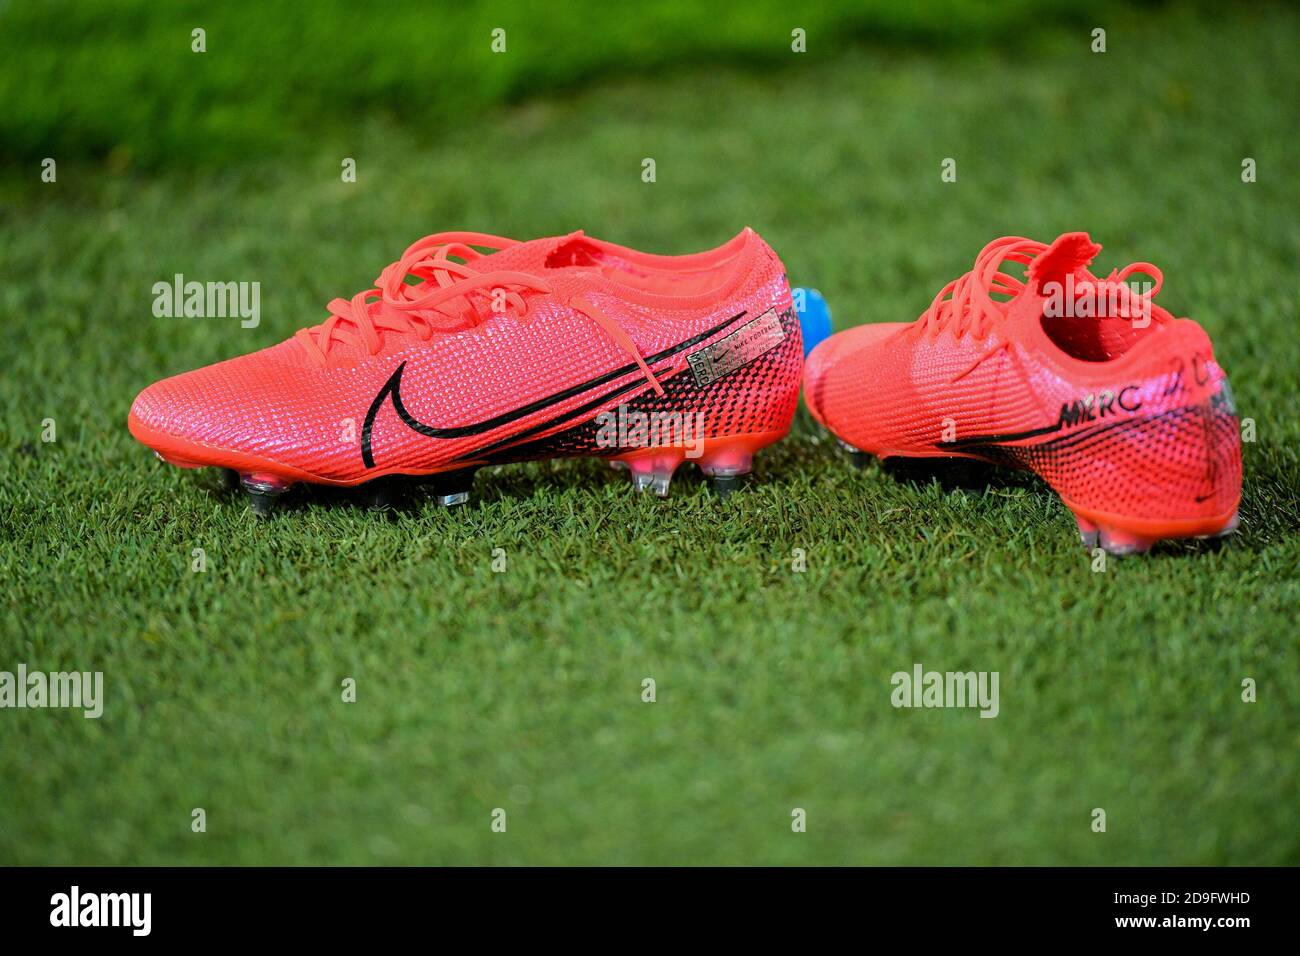 ROTTERDAM, NETHERLANDS - NOVEMBER 05: Nike merc 20 shoes during a training  session before the UEFA Europa League match between Feyenoord and CSKA Mosc  Stock Photo - Alamy